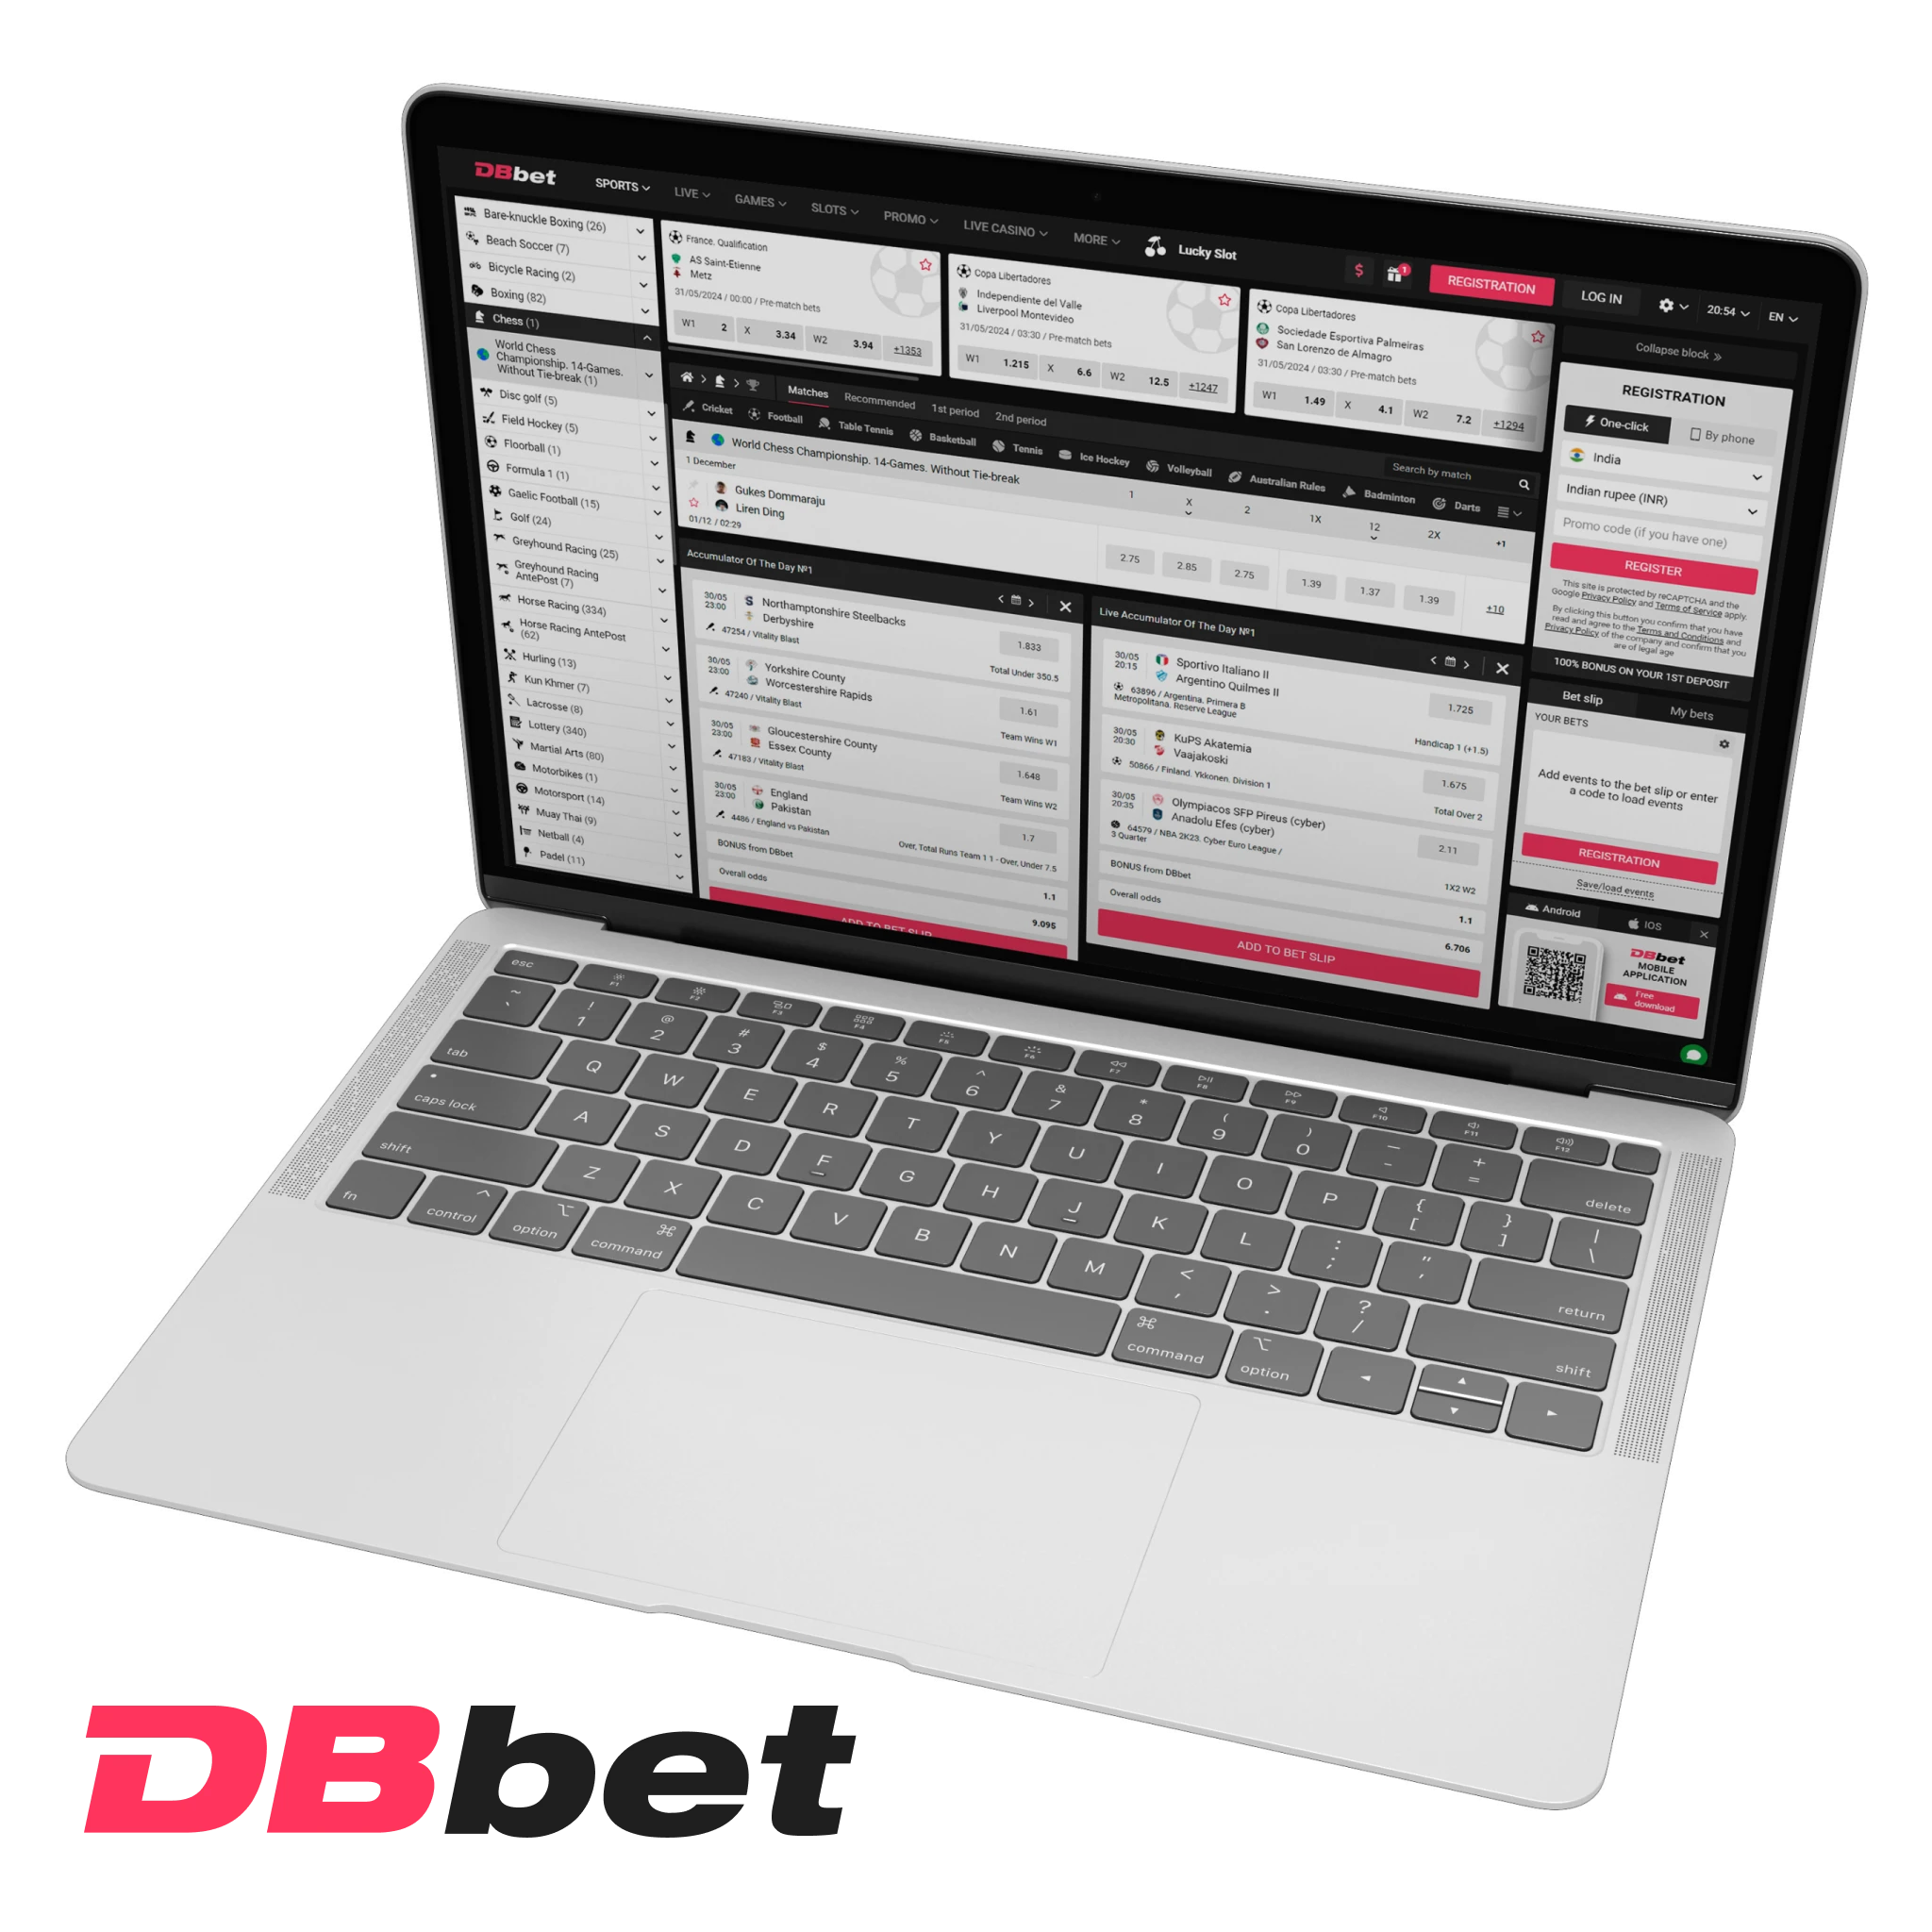 Dbbet is a unique gaming platform as it emphasizes on chess betting and offers the most favorable conditions for Indian users.